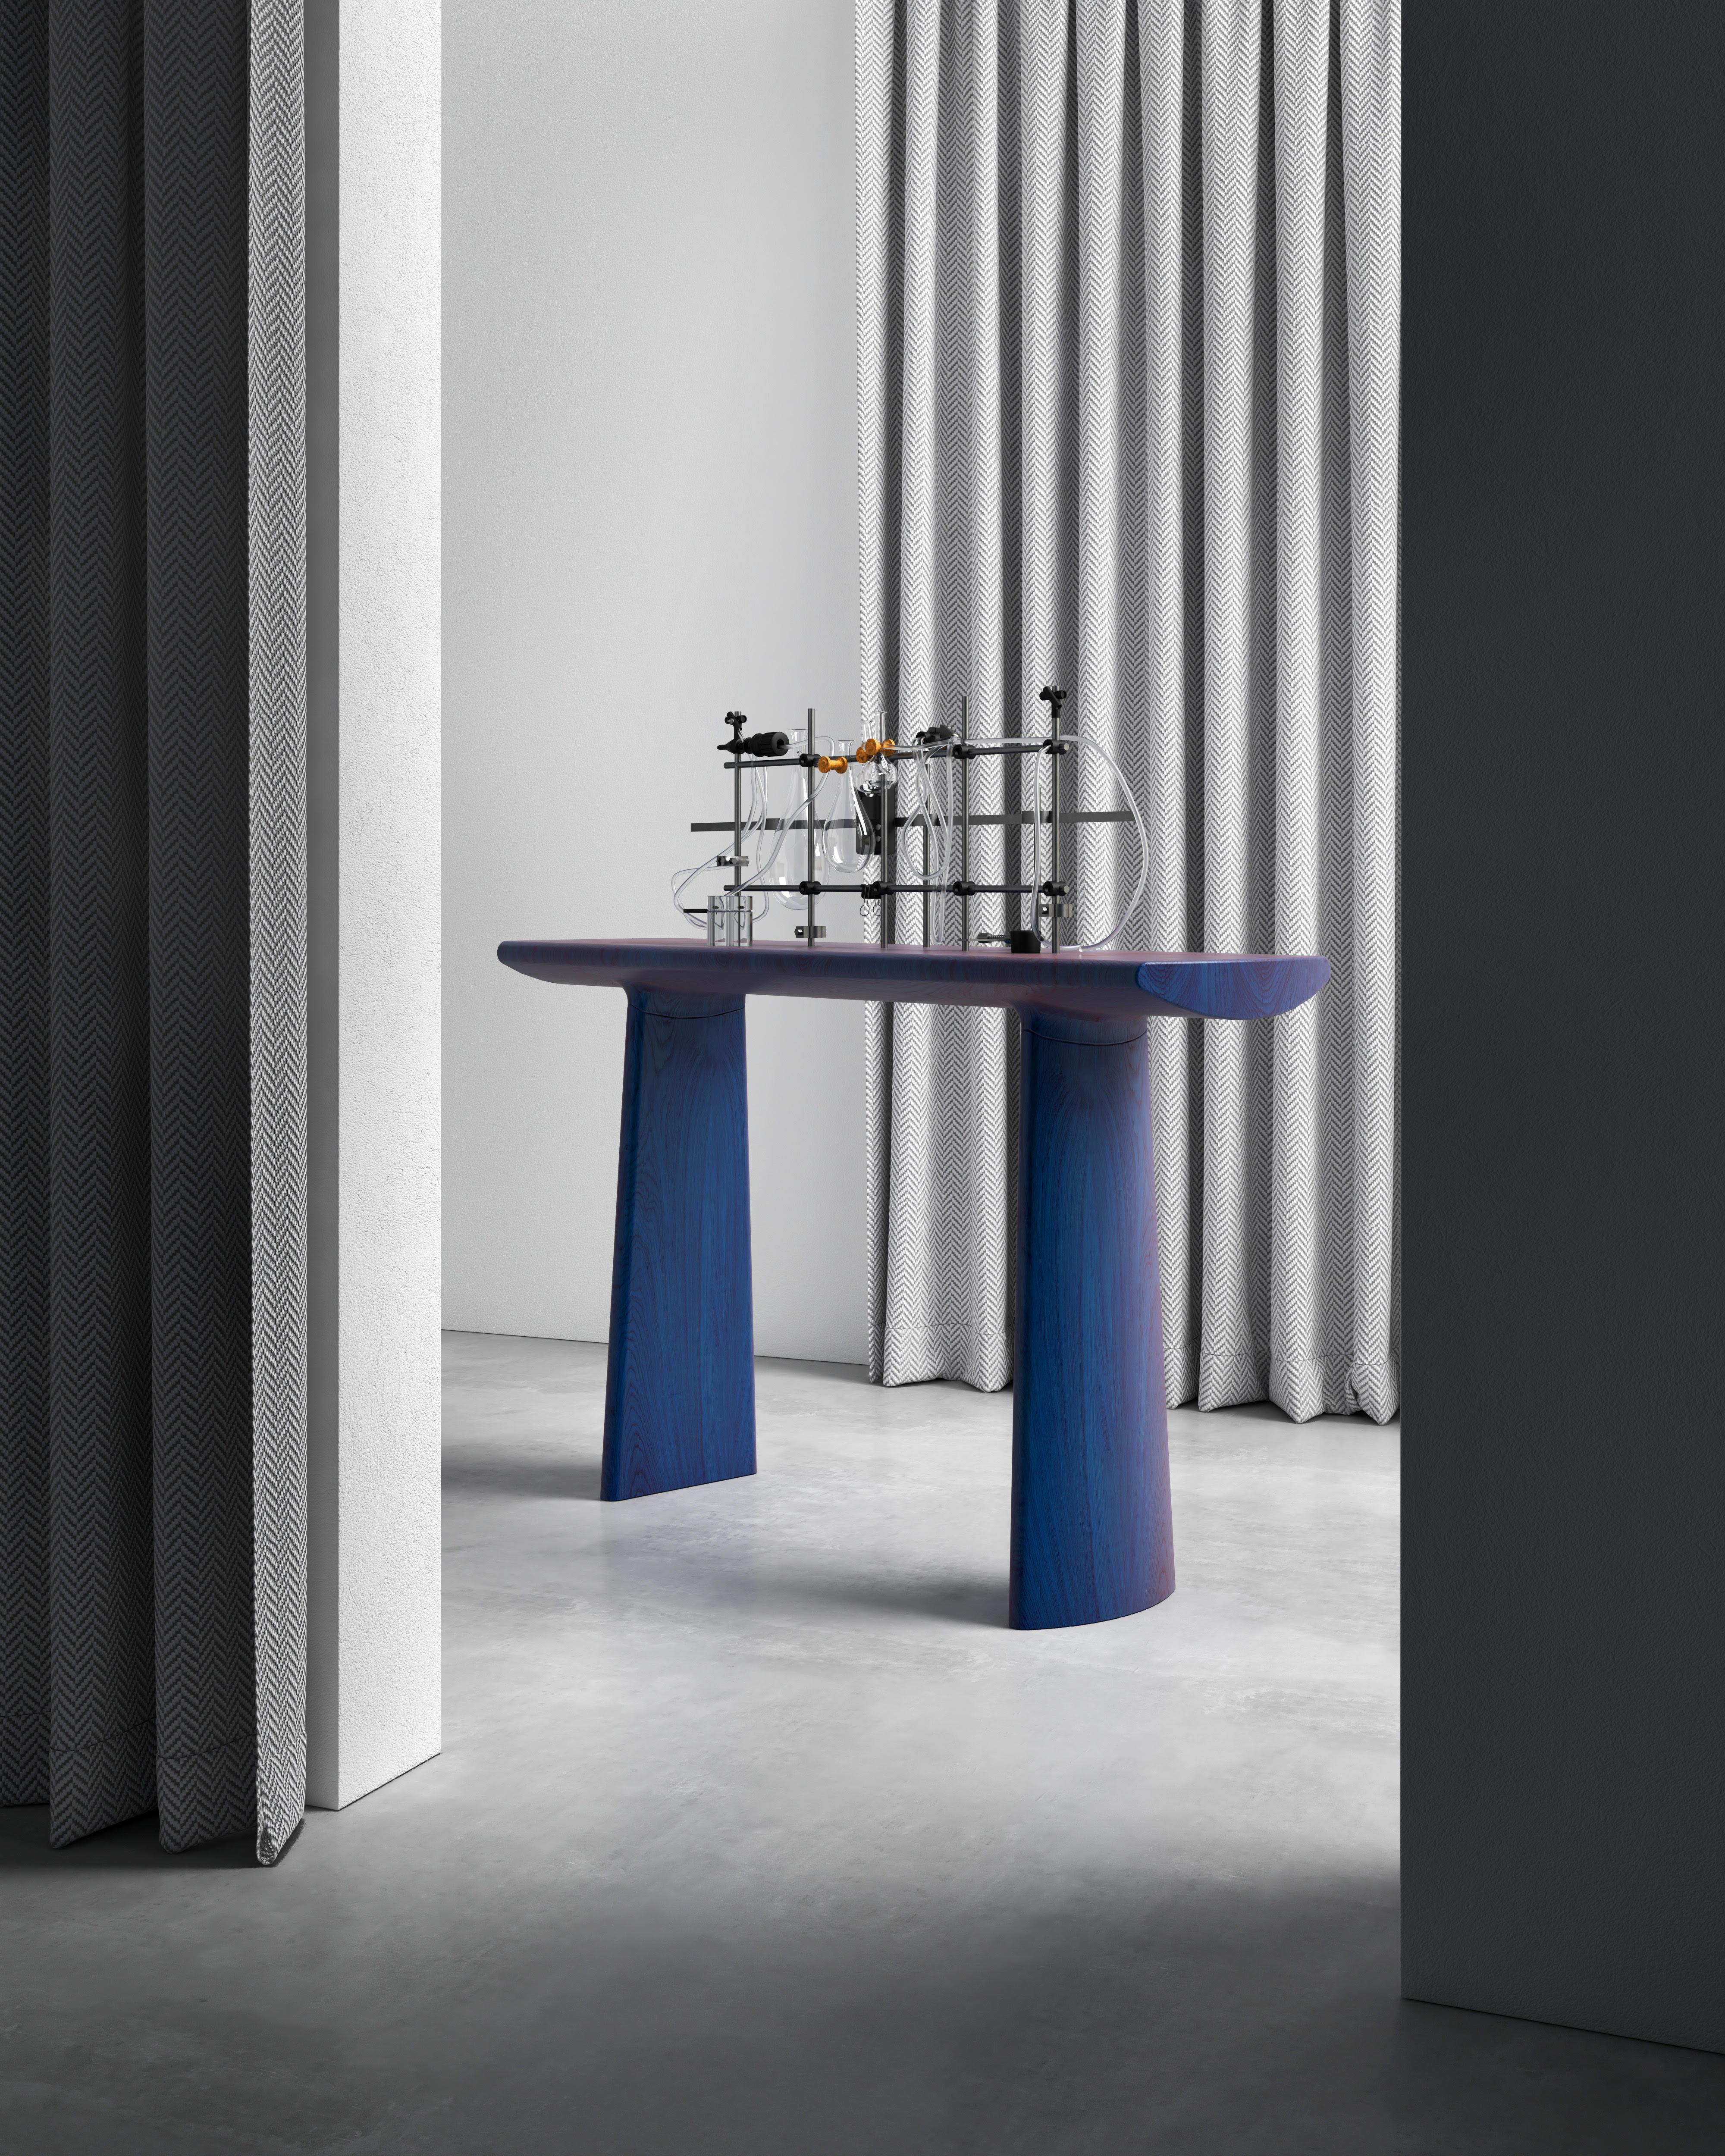 Daiku Console is presented by by Victoria Magniant for Galerie V

The Daiku collection is a serie of eco-designed pieces inviting simplicity. The surface is deeply sanded to create fluid shapes and finished with rich water based stain to expose the